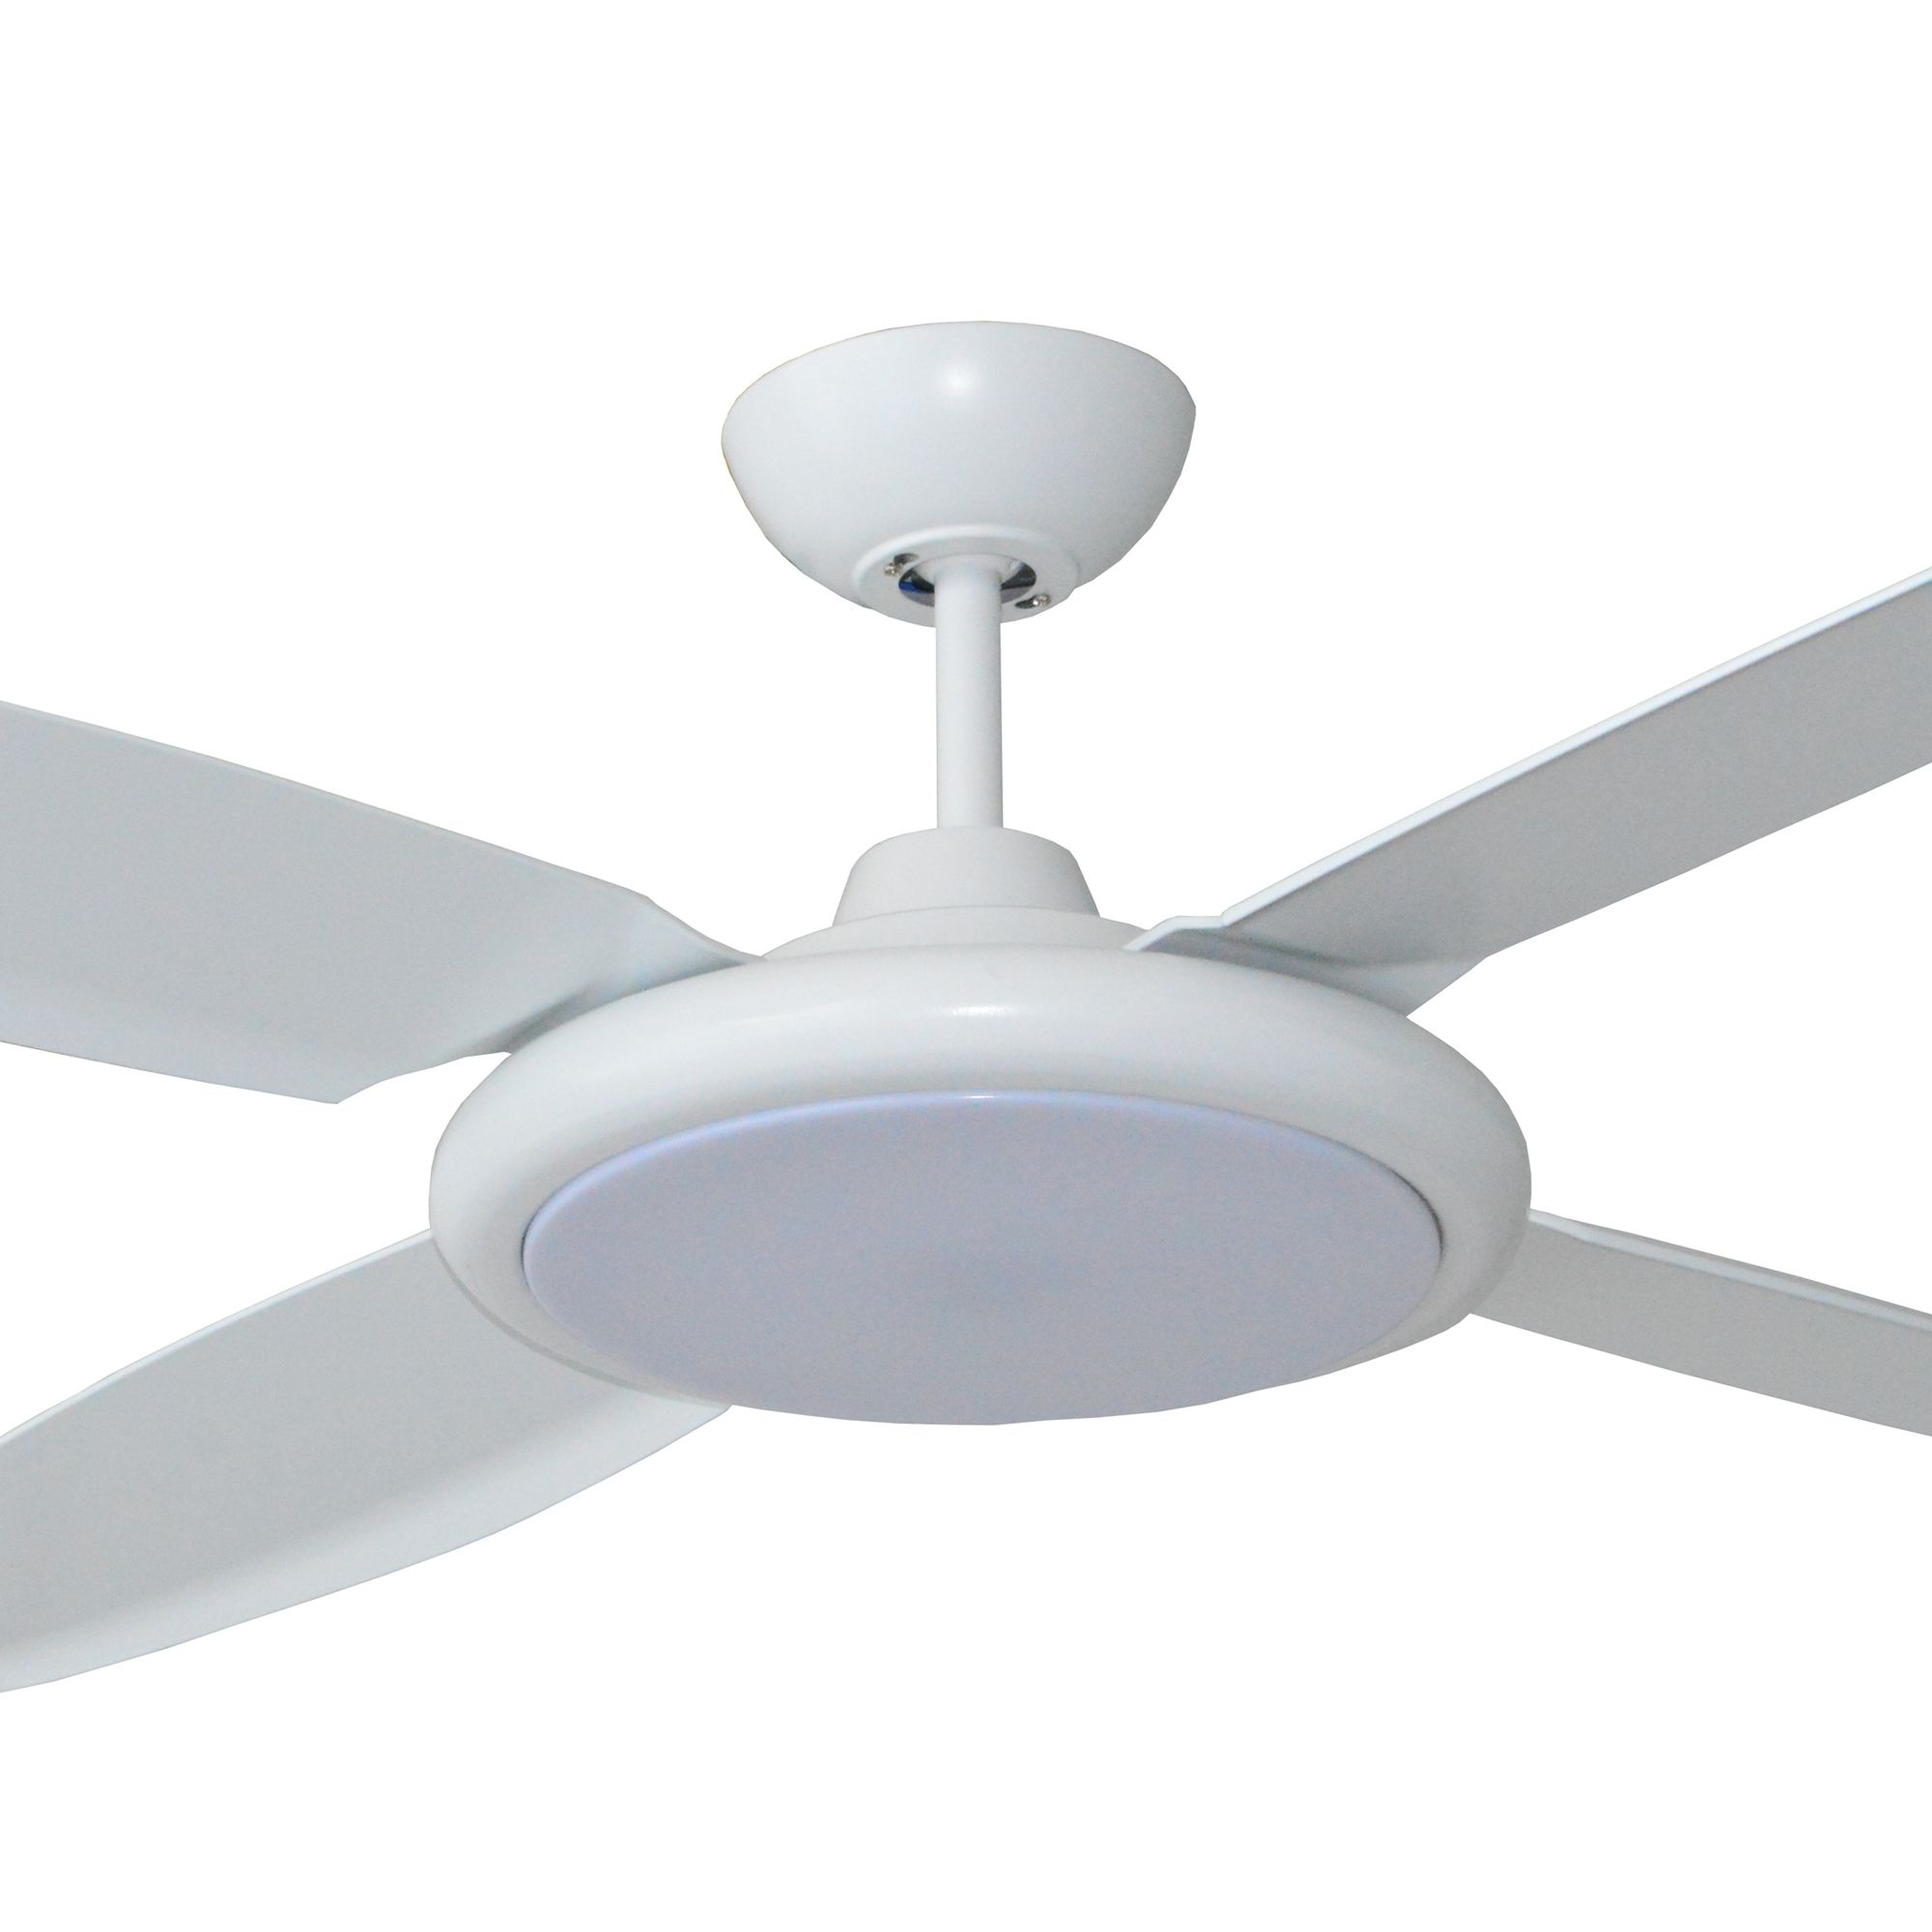 Ceiling Fan With Fans As Blades Intended For Fashionable Marcoux 5 Blade Ceiling Fans (View 17 of 20)